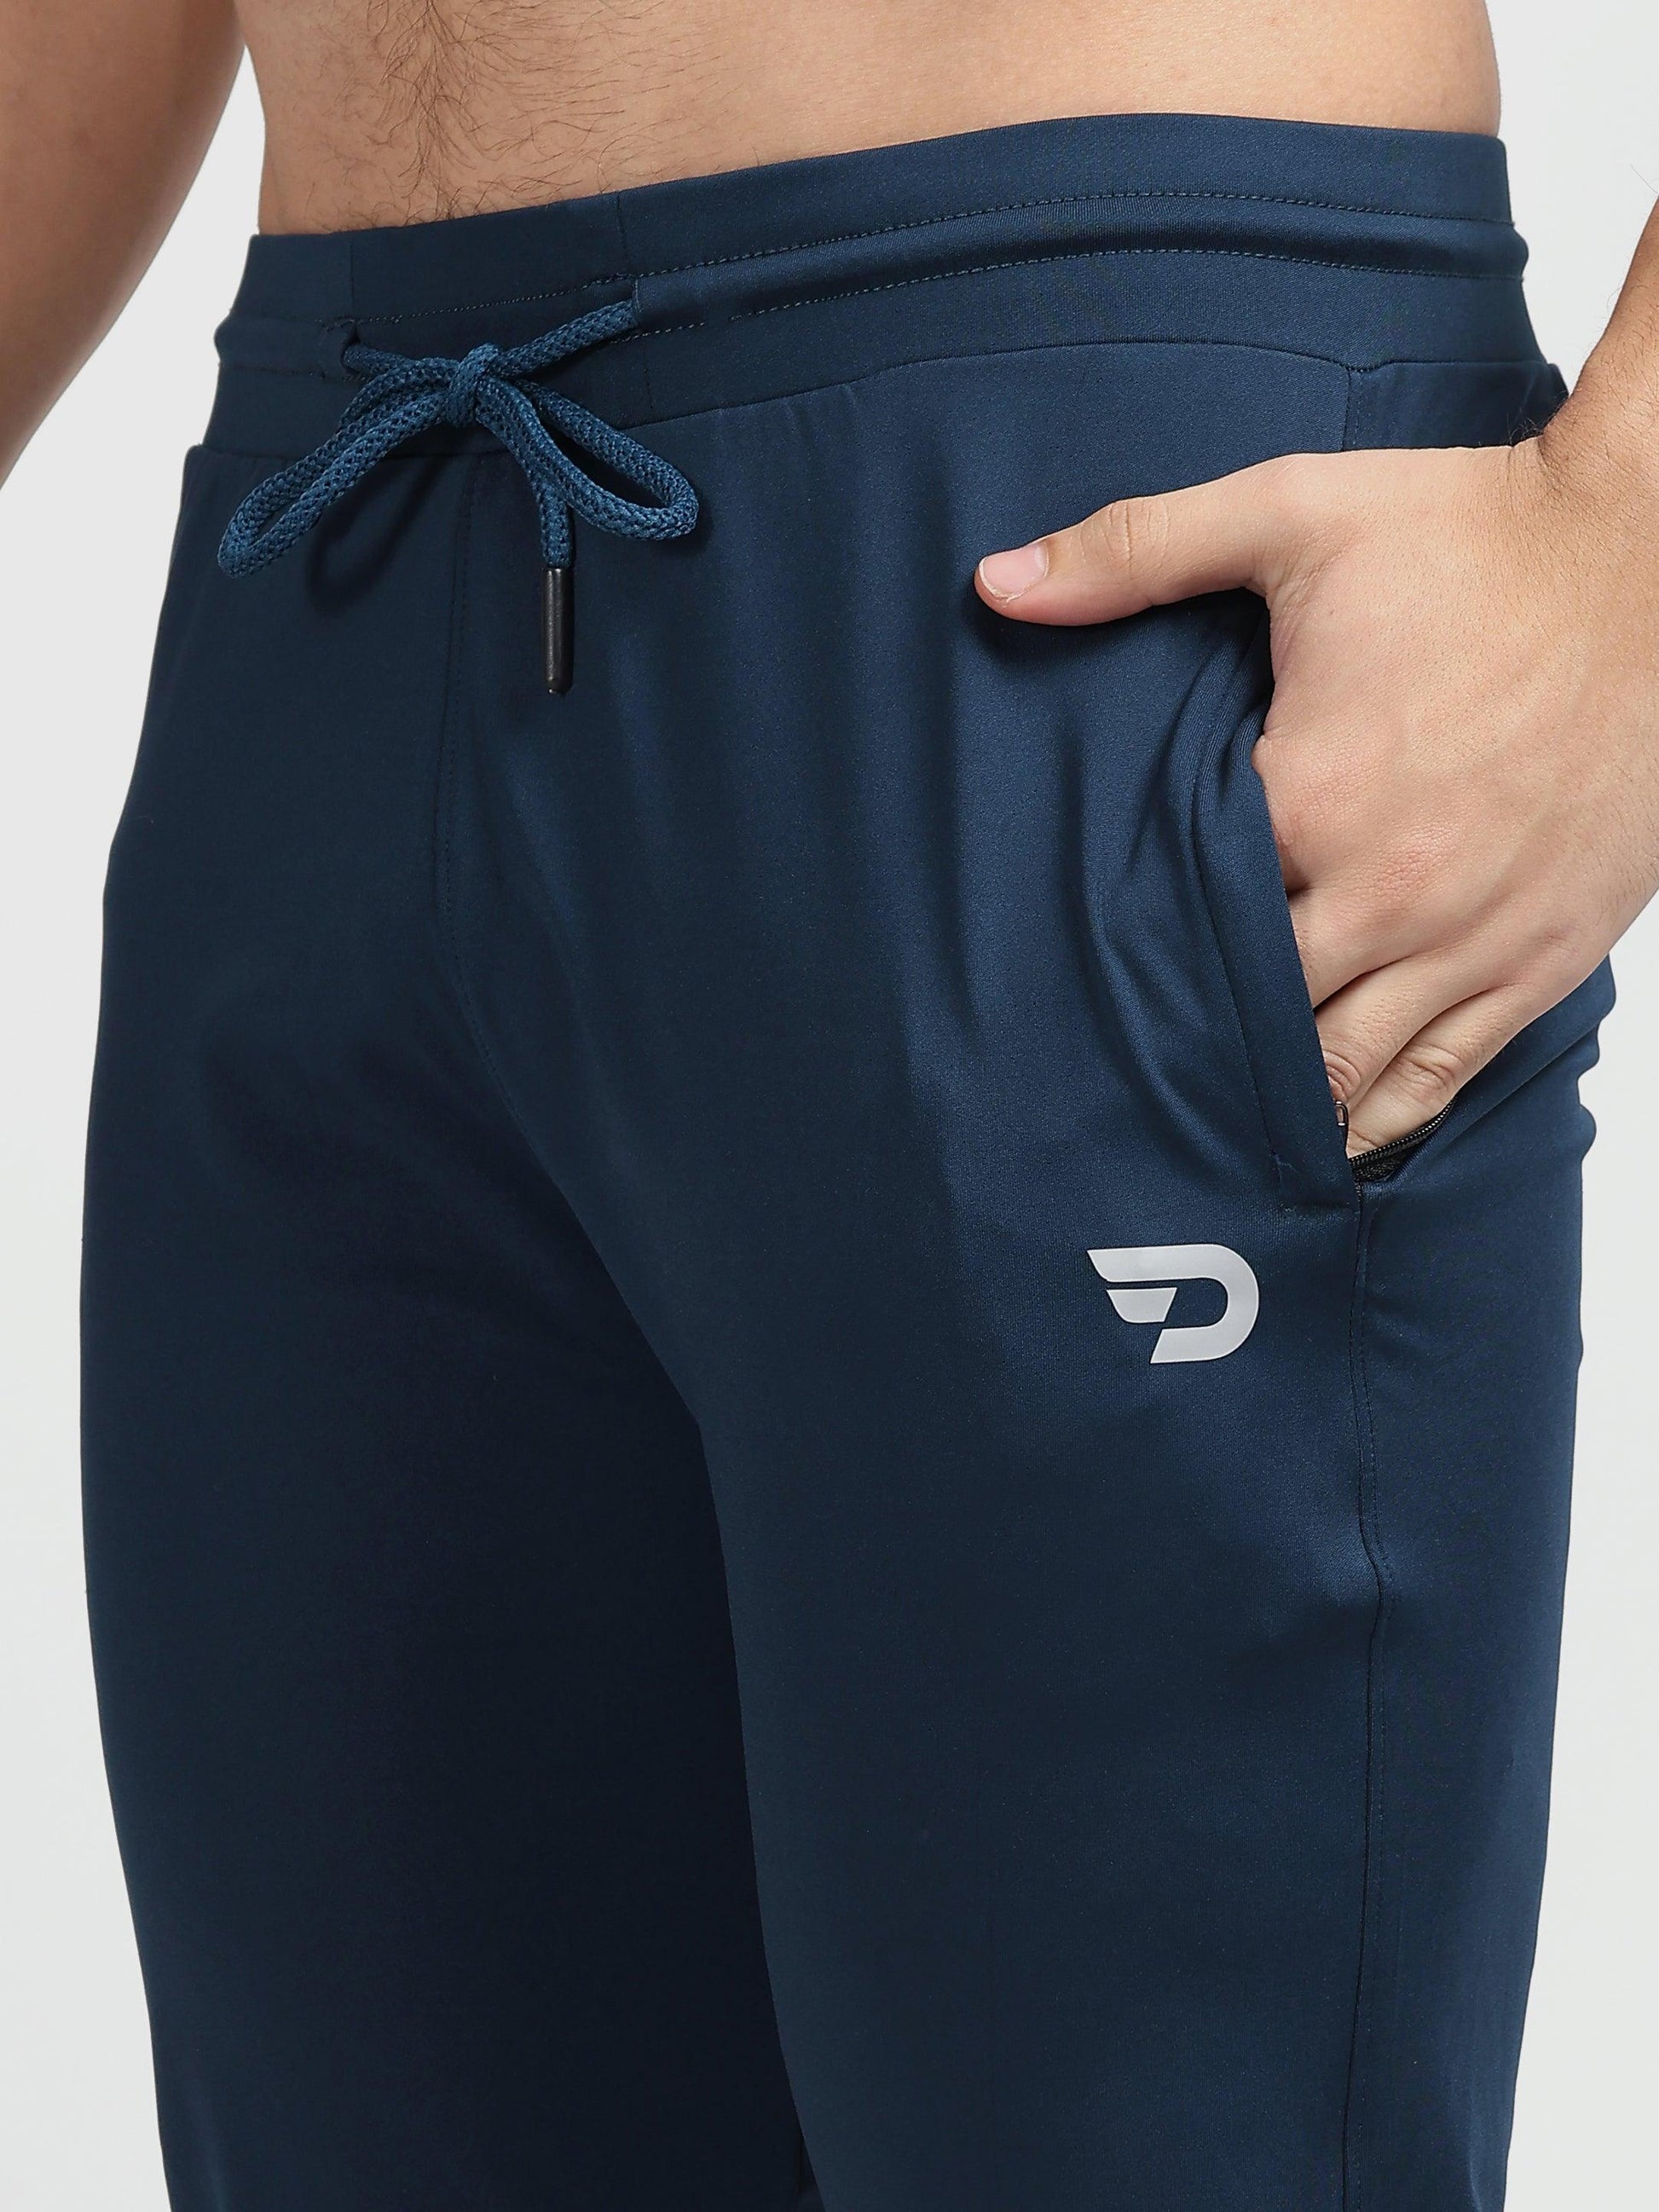 Denmonk: Elevate your look with these Power joggers sharp regal blue joggers for mens.